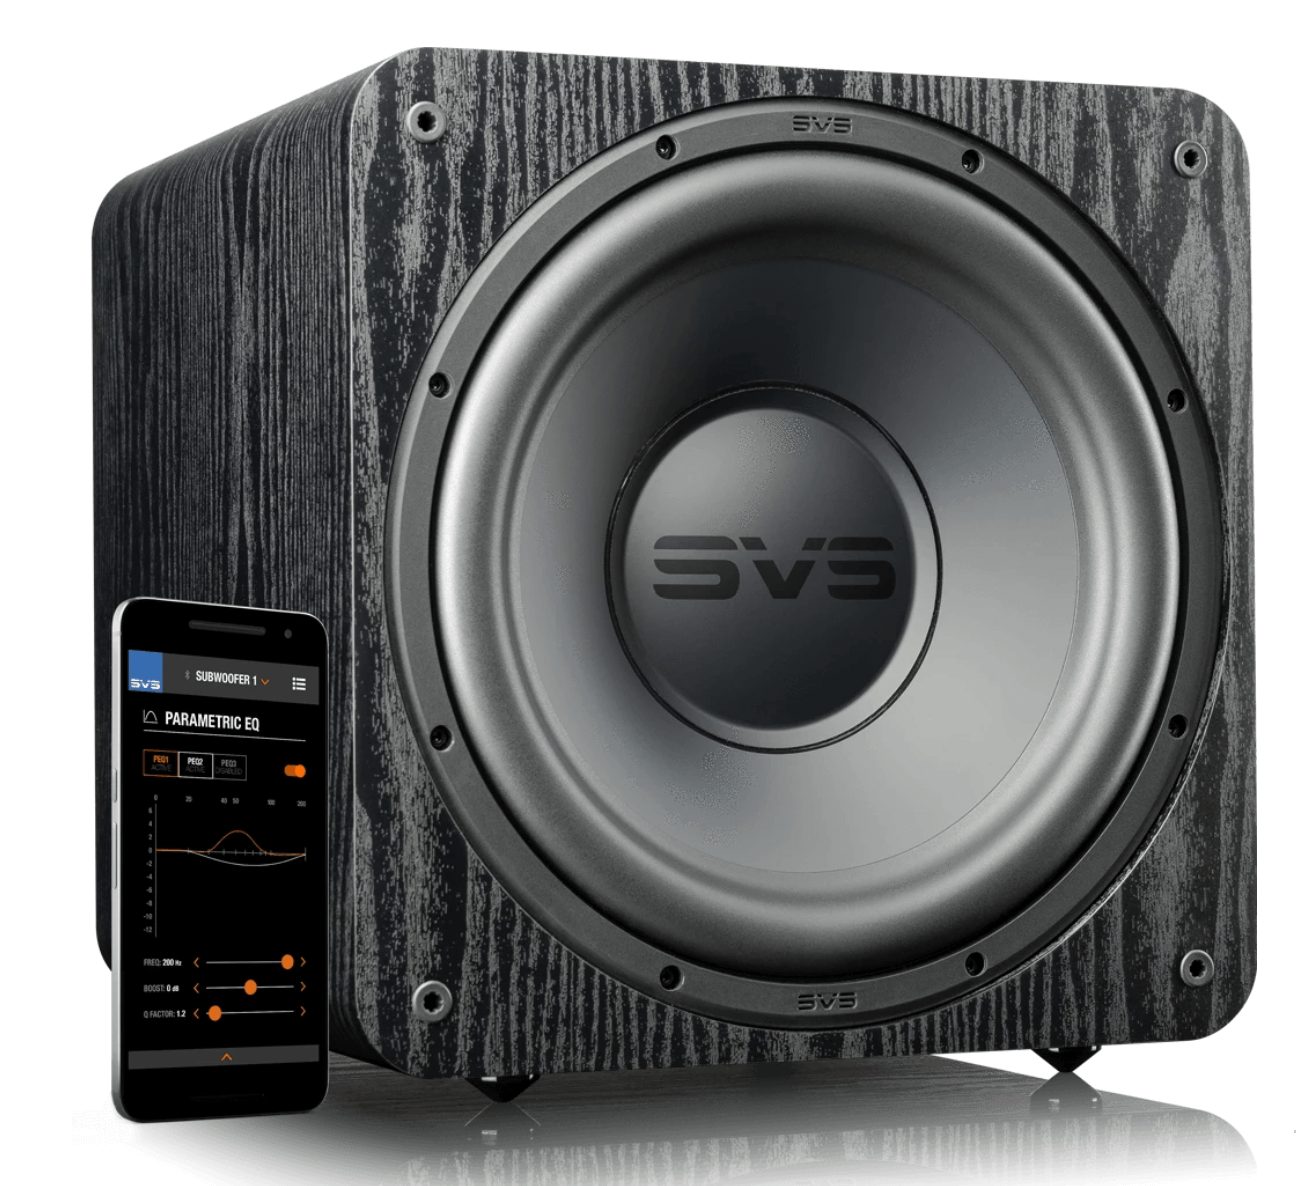 SVS sales are few and far between, but you can save today with this 5.1 bundle of five Prime Satellite speakers and the SB-1000 Pro subwoofer. SVS Prime 631c5997 image